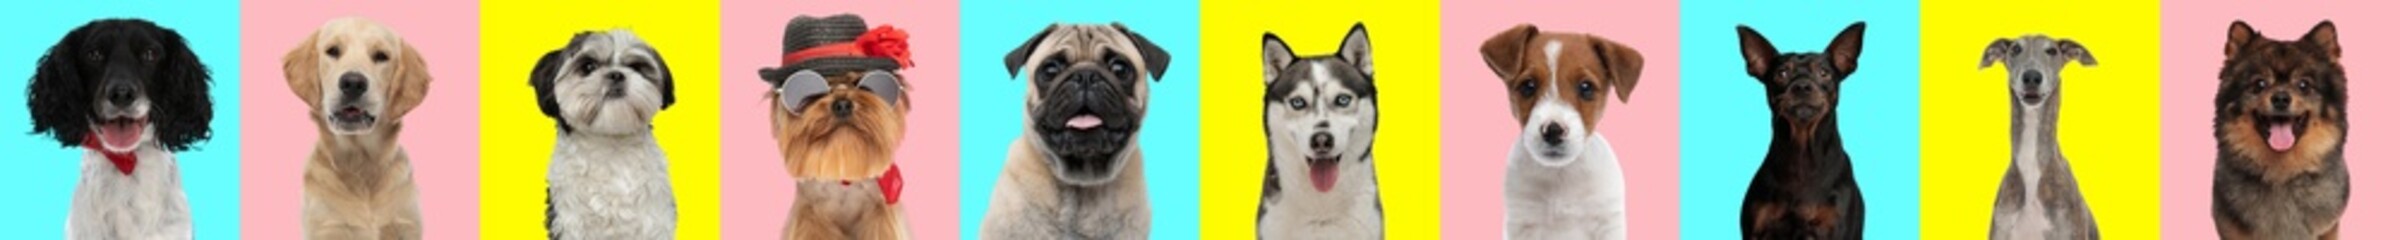 collage of photos with adorable dogs in front of blue, yellow and pink background